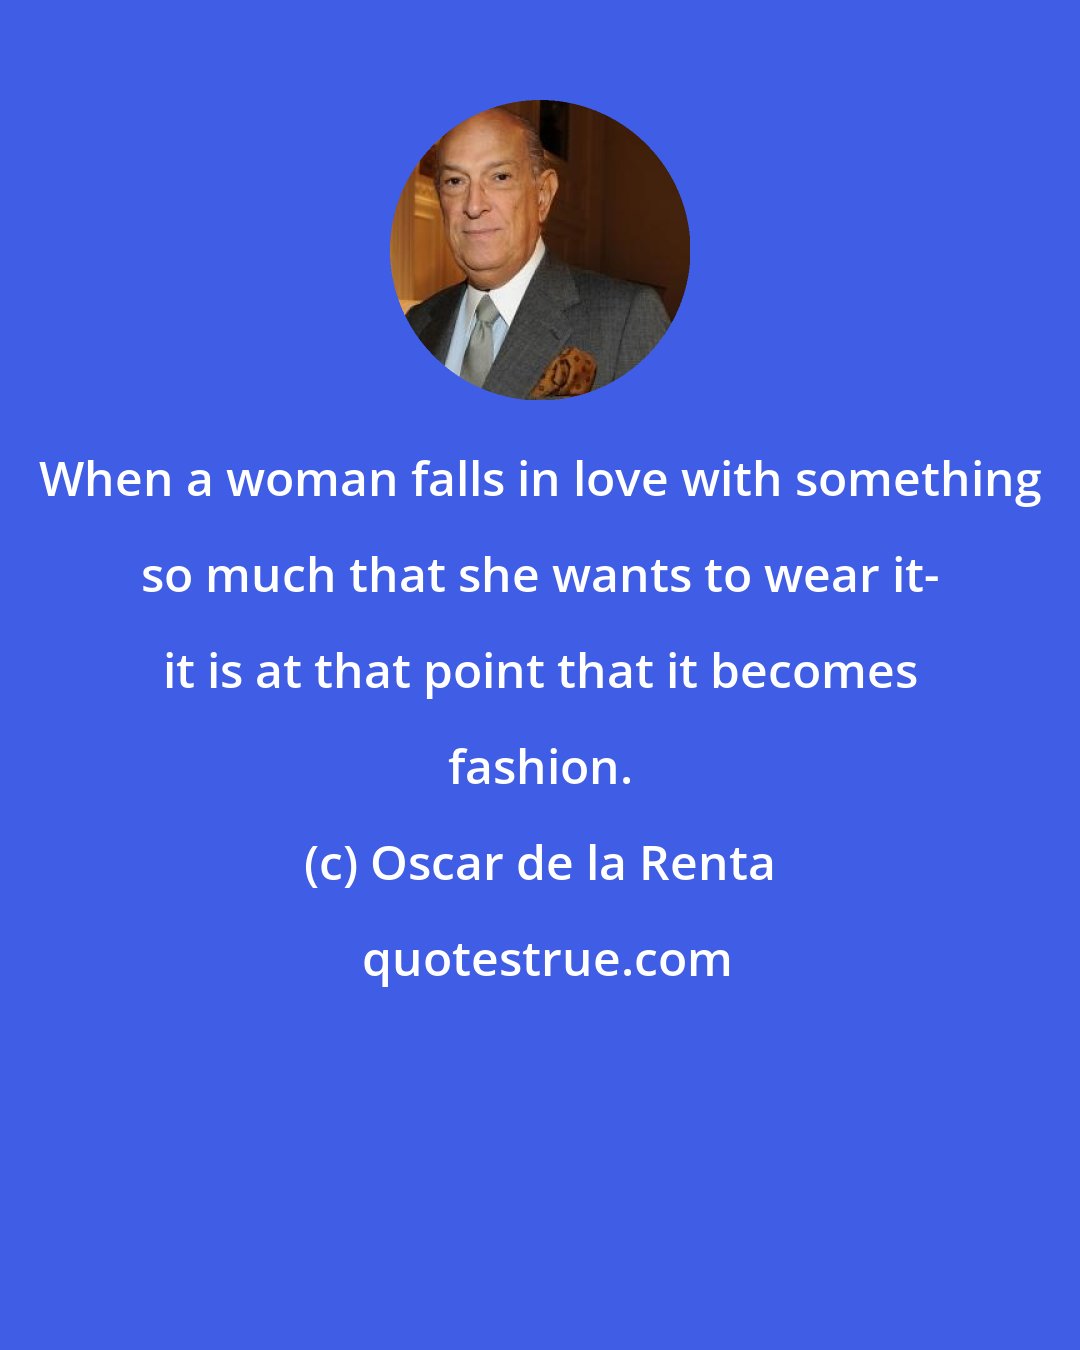 Oscar de la Renta: When a woman falls in love with something so much that she wants to wear it- it is at that point that it becomes fashion.